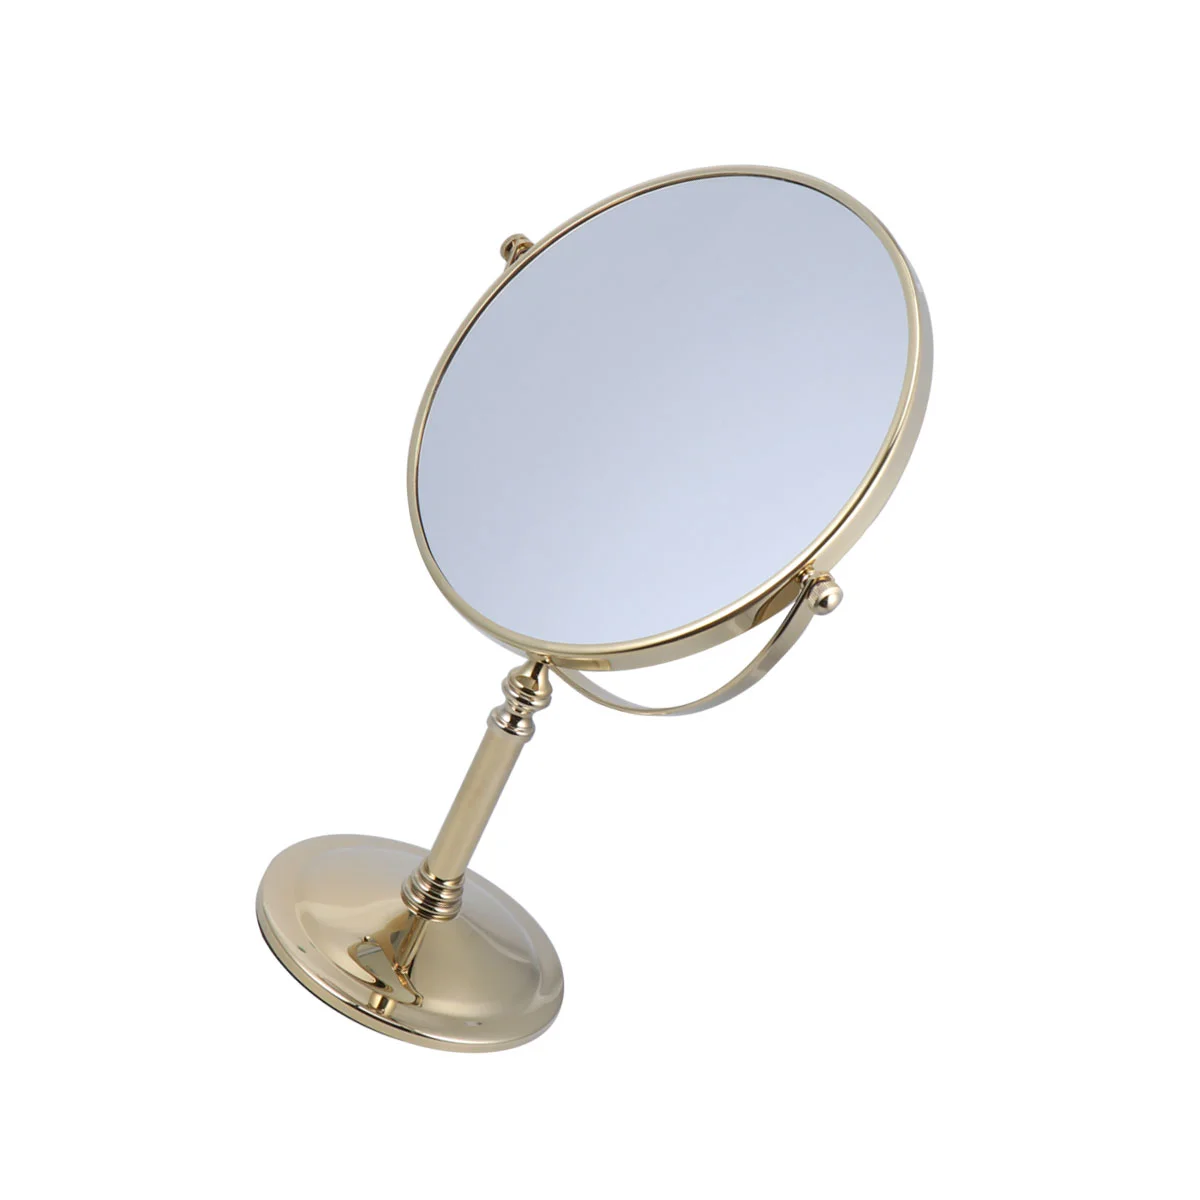 

Travel Vanity Vanity Magnifying Side Golden Table Double Magnification 3X Stand Swivel Home Two Bathroom Shaving